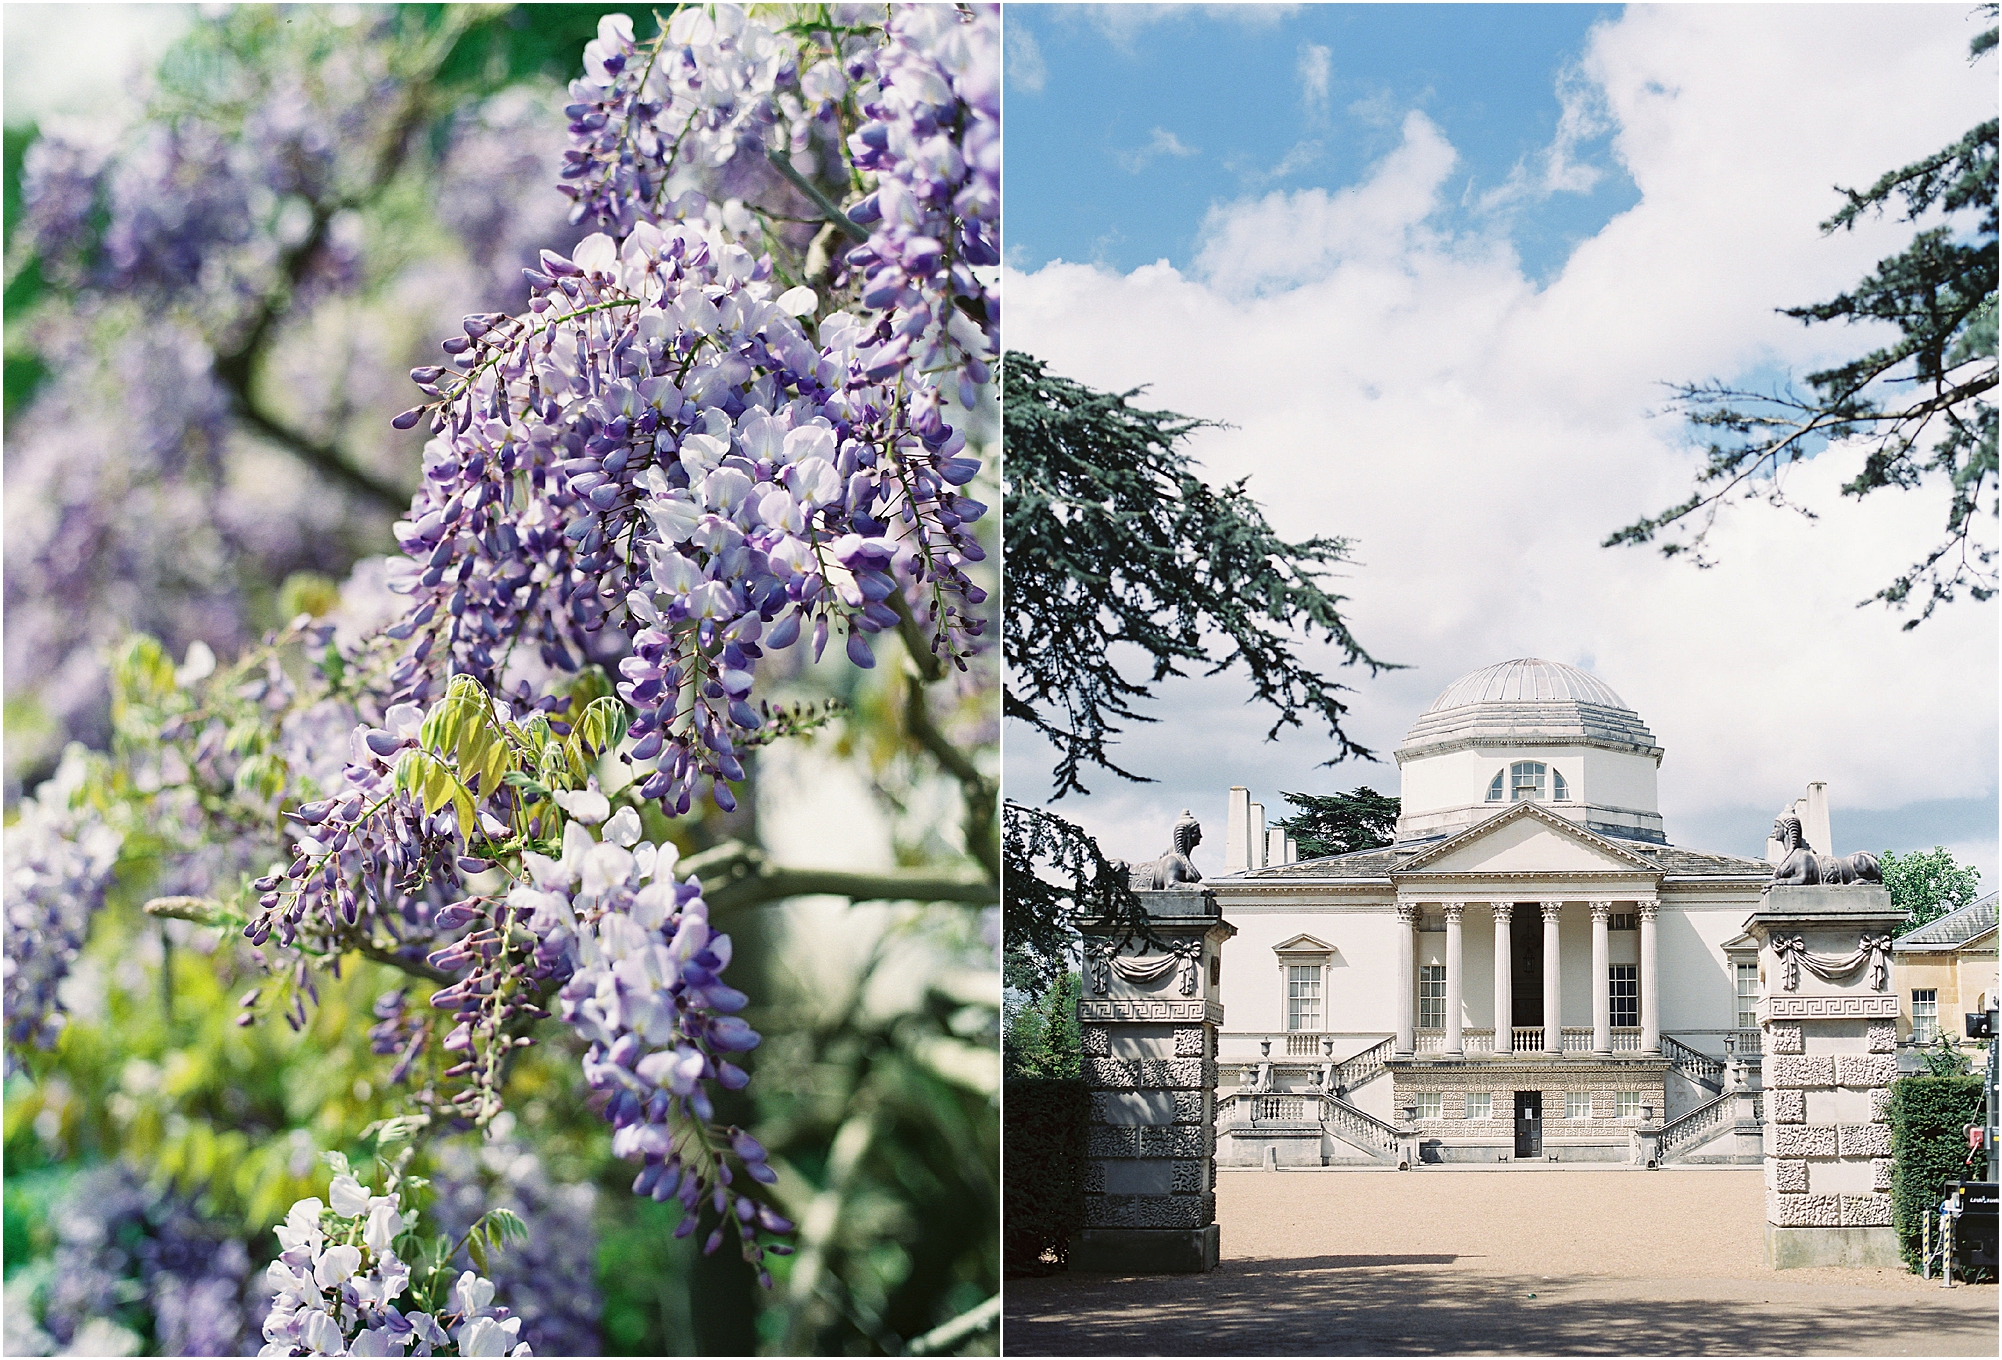 Wisteria in bloom at Chiswick House